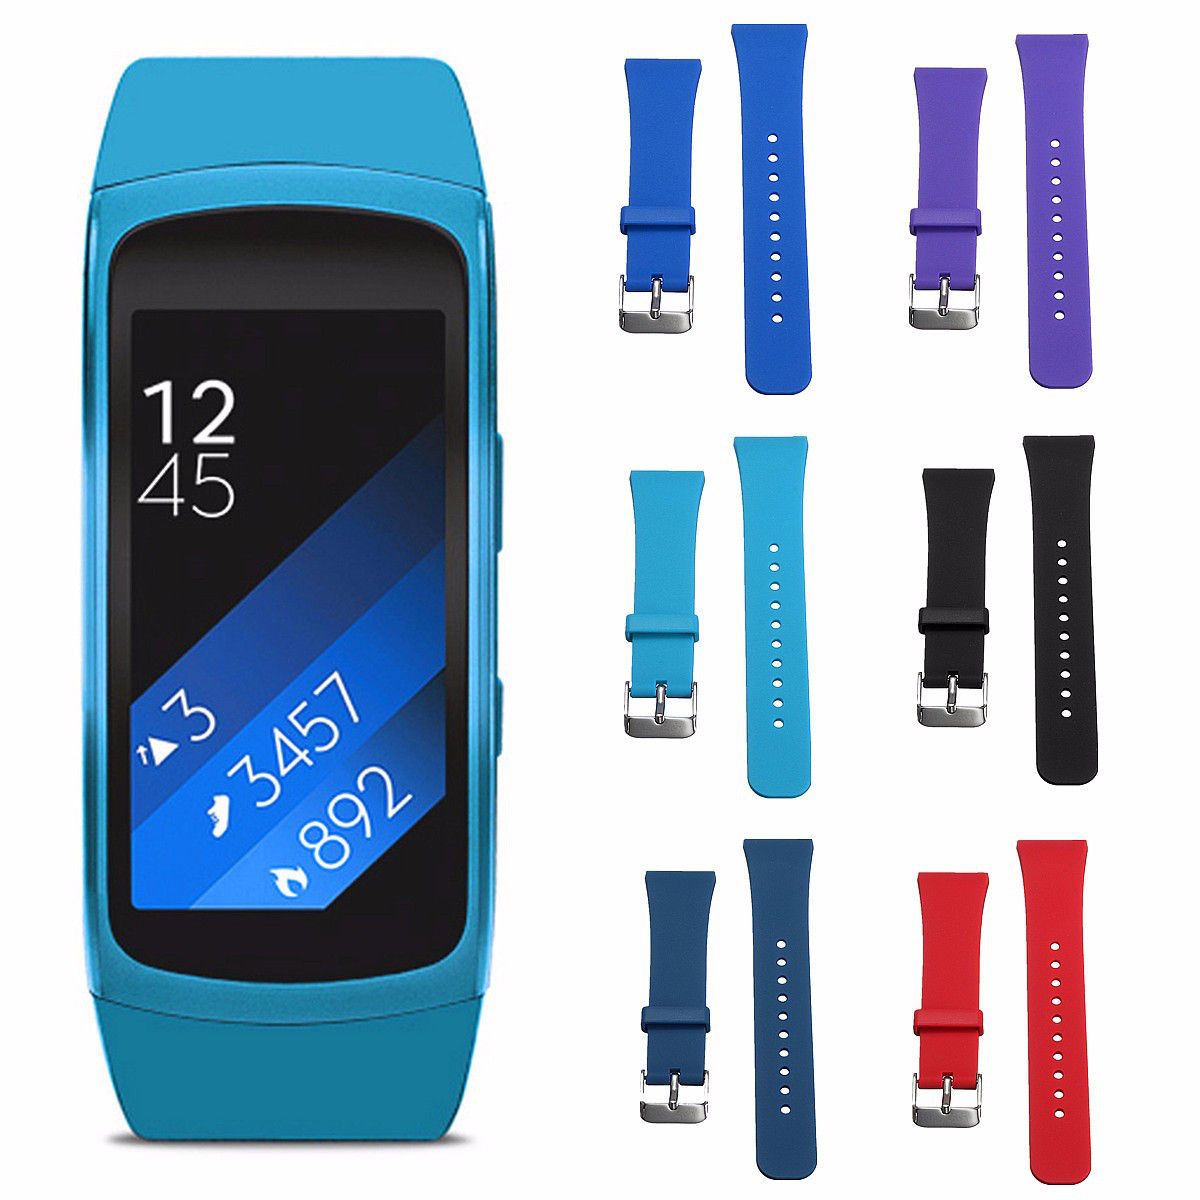 Approx-115-175cm-Silicone-Soft-Replacement-Smart-Wrist-Strap-For-Samsung-Gear-Fit-2-1087609